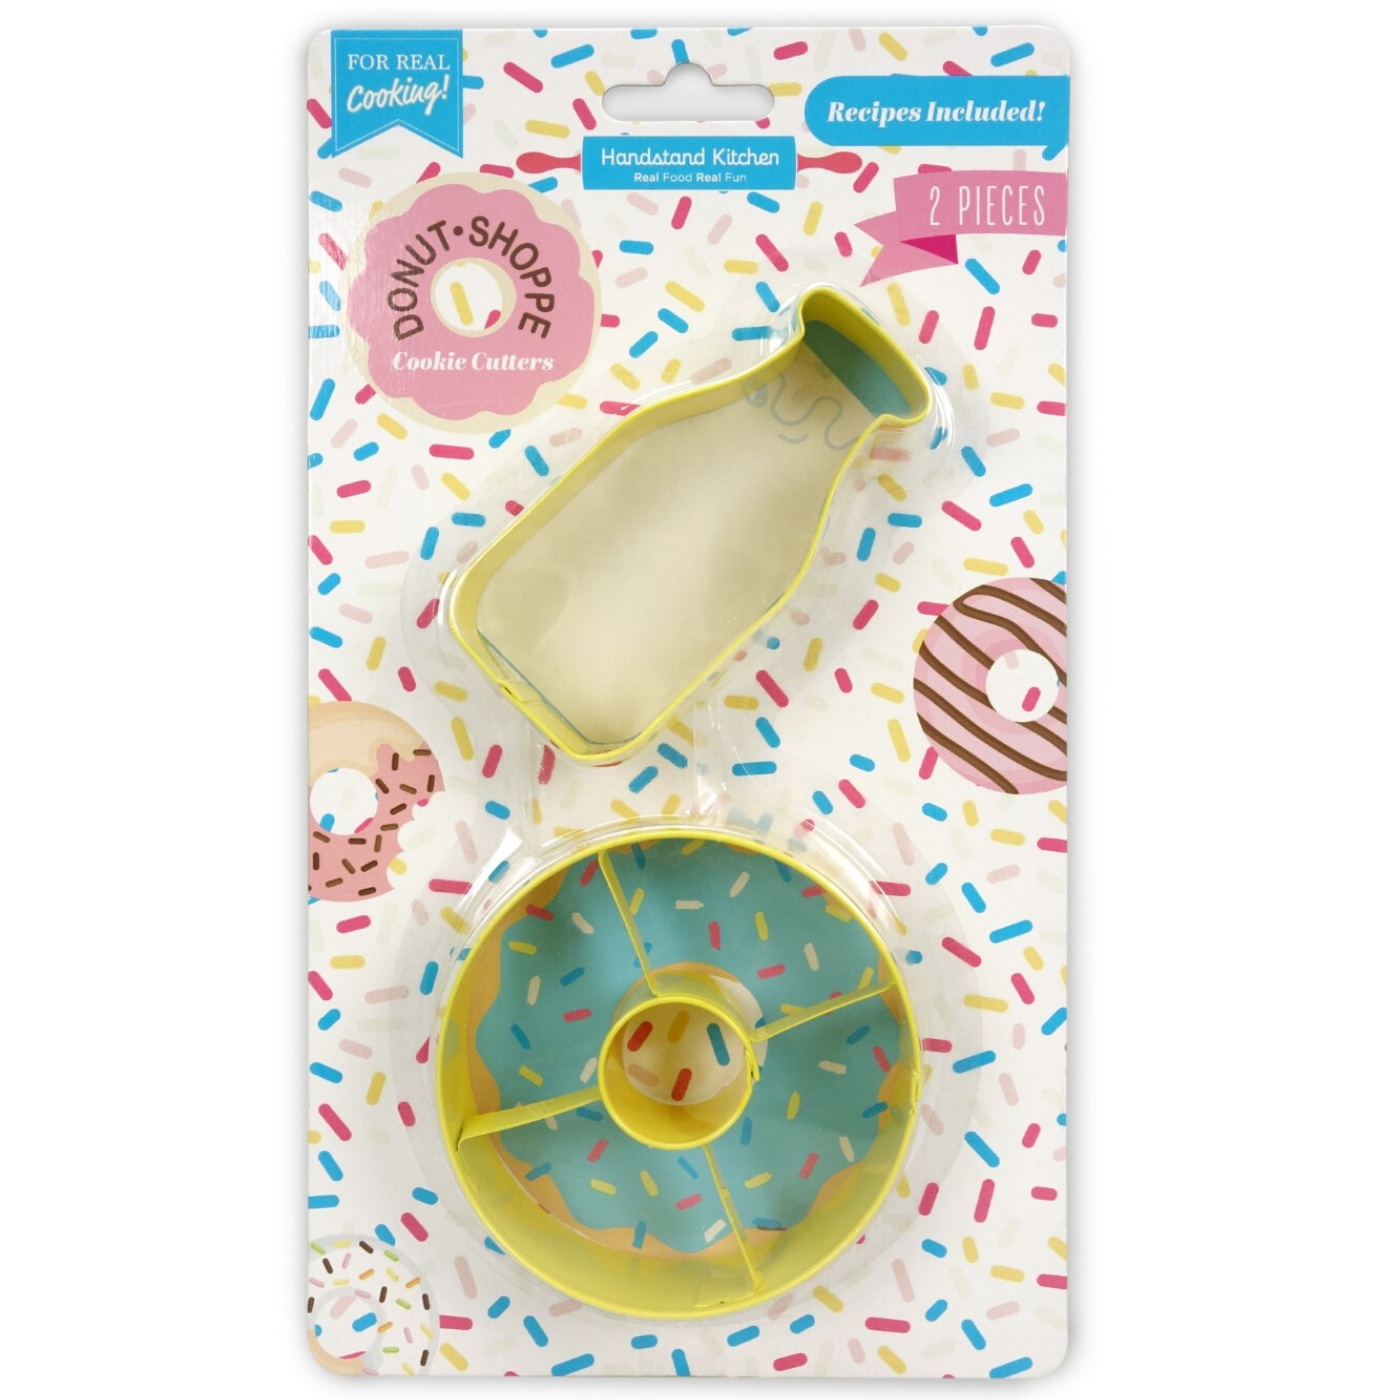 Donut Shoppe Set of 2 Cookie Cutters